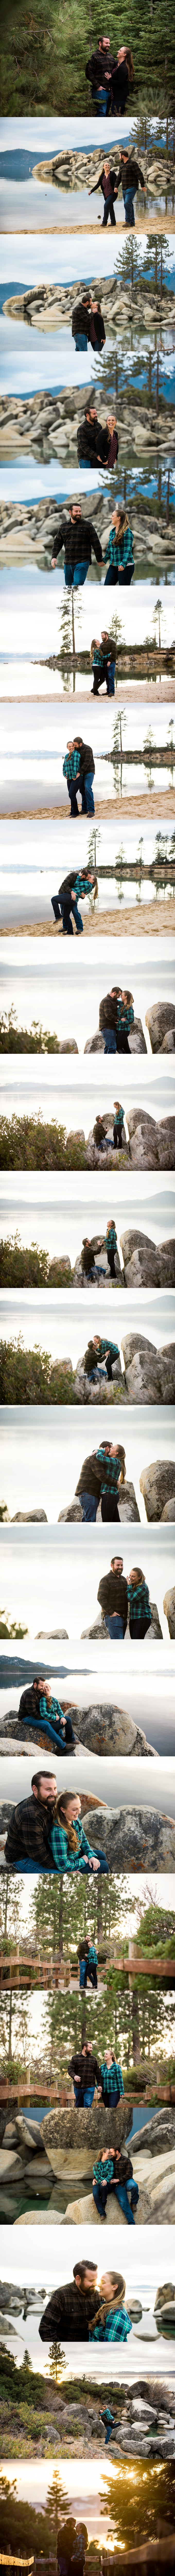 Sand Harbor Marriage Proposal